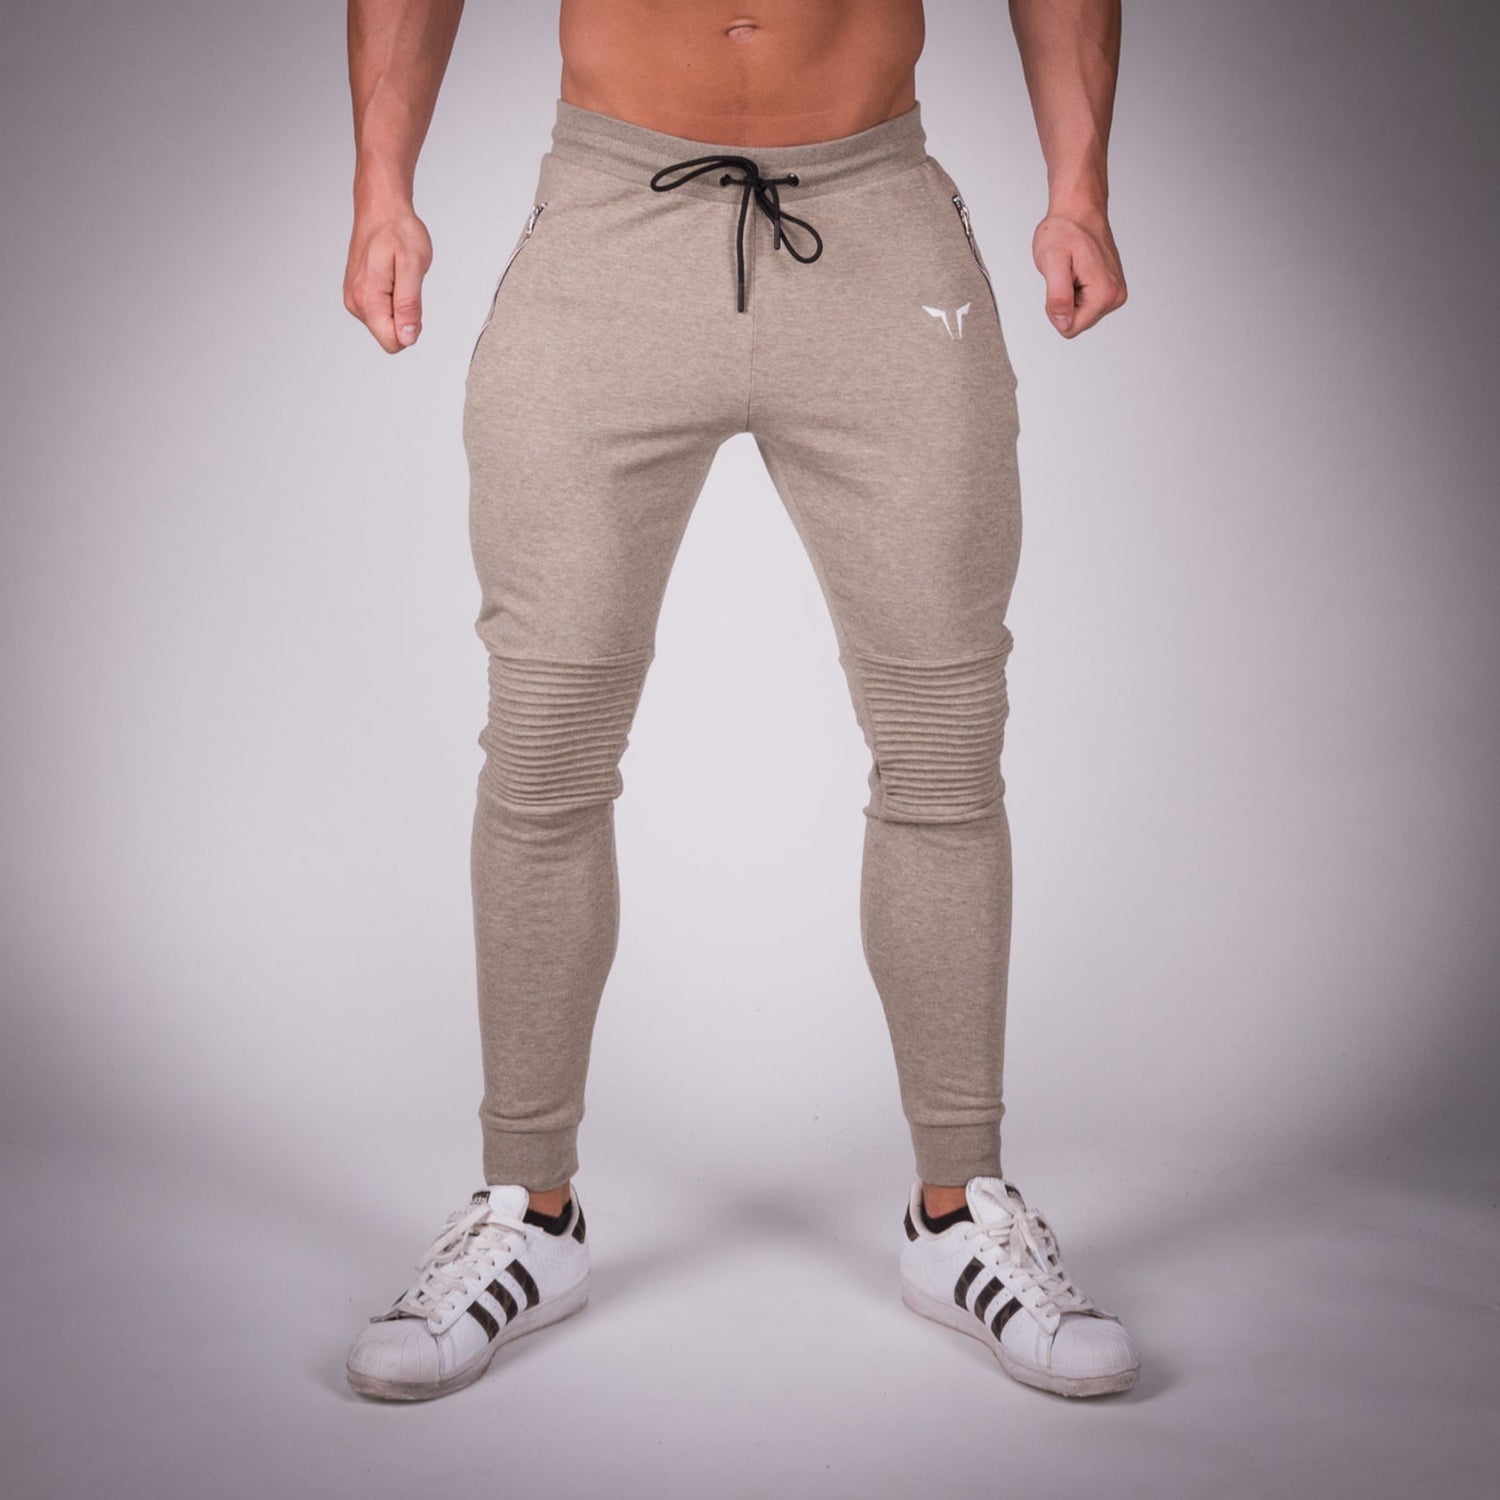 squatwolf-gym-wear-ripped-jogger-pants-green-workout-pants-for-men